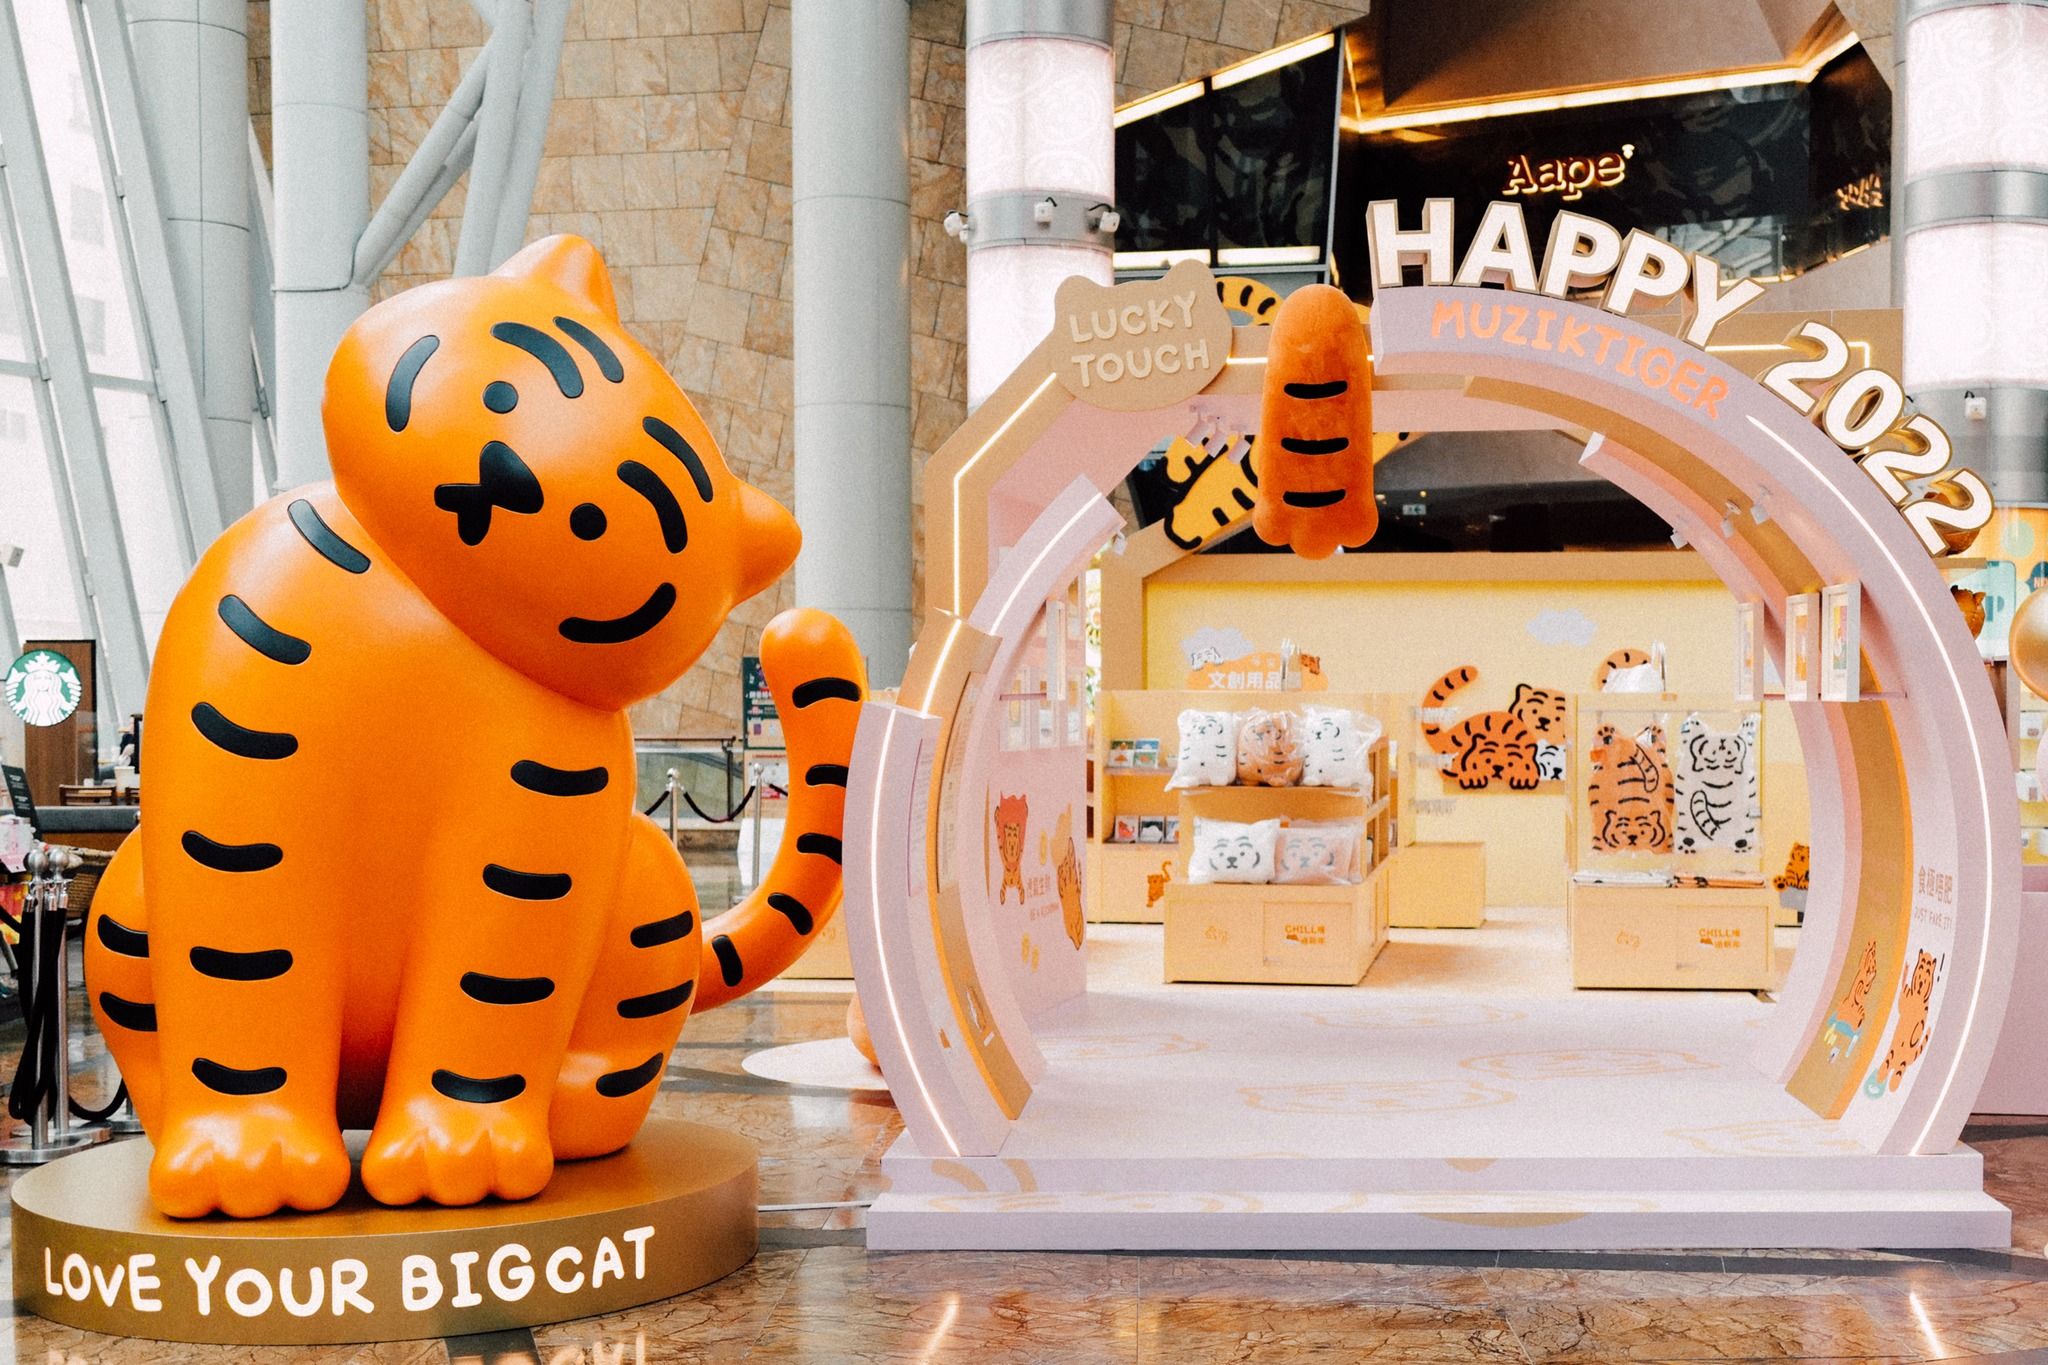 The Best Chinese New Year Displays in Hong Kong for the Year of the Tiger